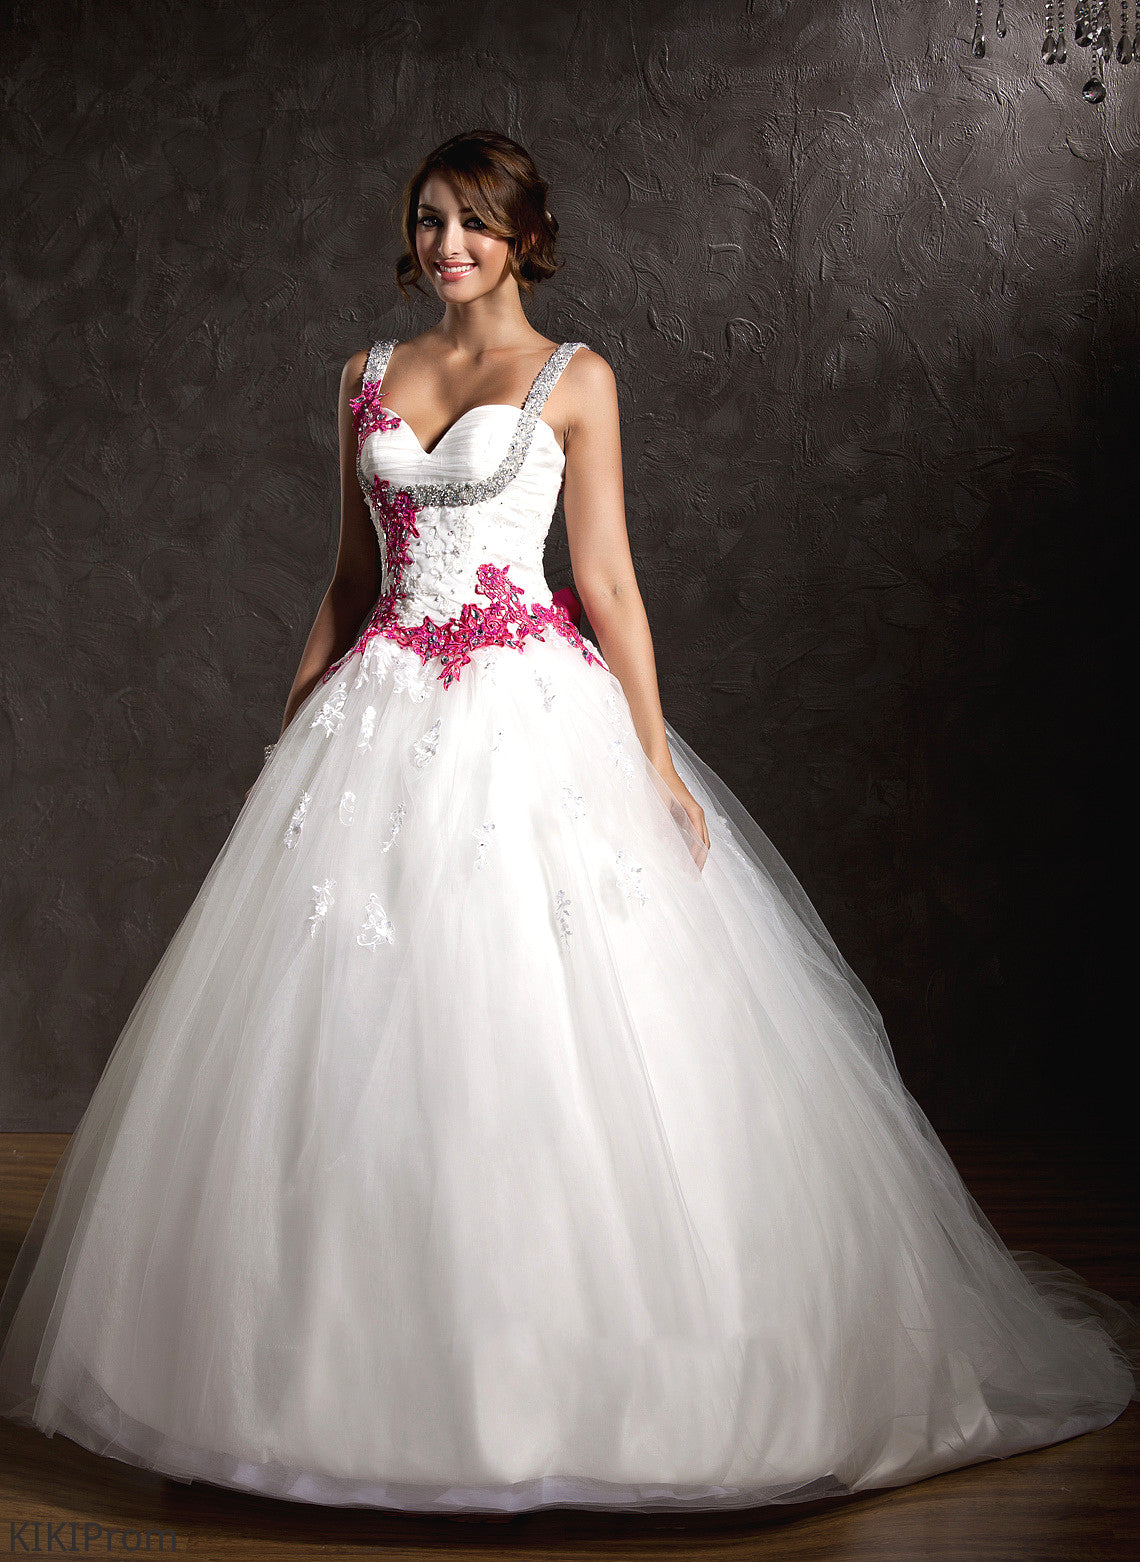 Chapel Sweetheart Bow(s) Ball-Gown/Princess Wedding Train Wedding Dresses Appliques Dress Tulle With Lauretta Lace Ruffle